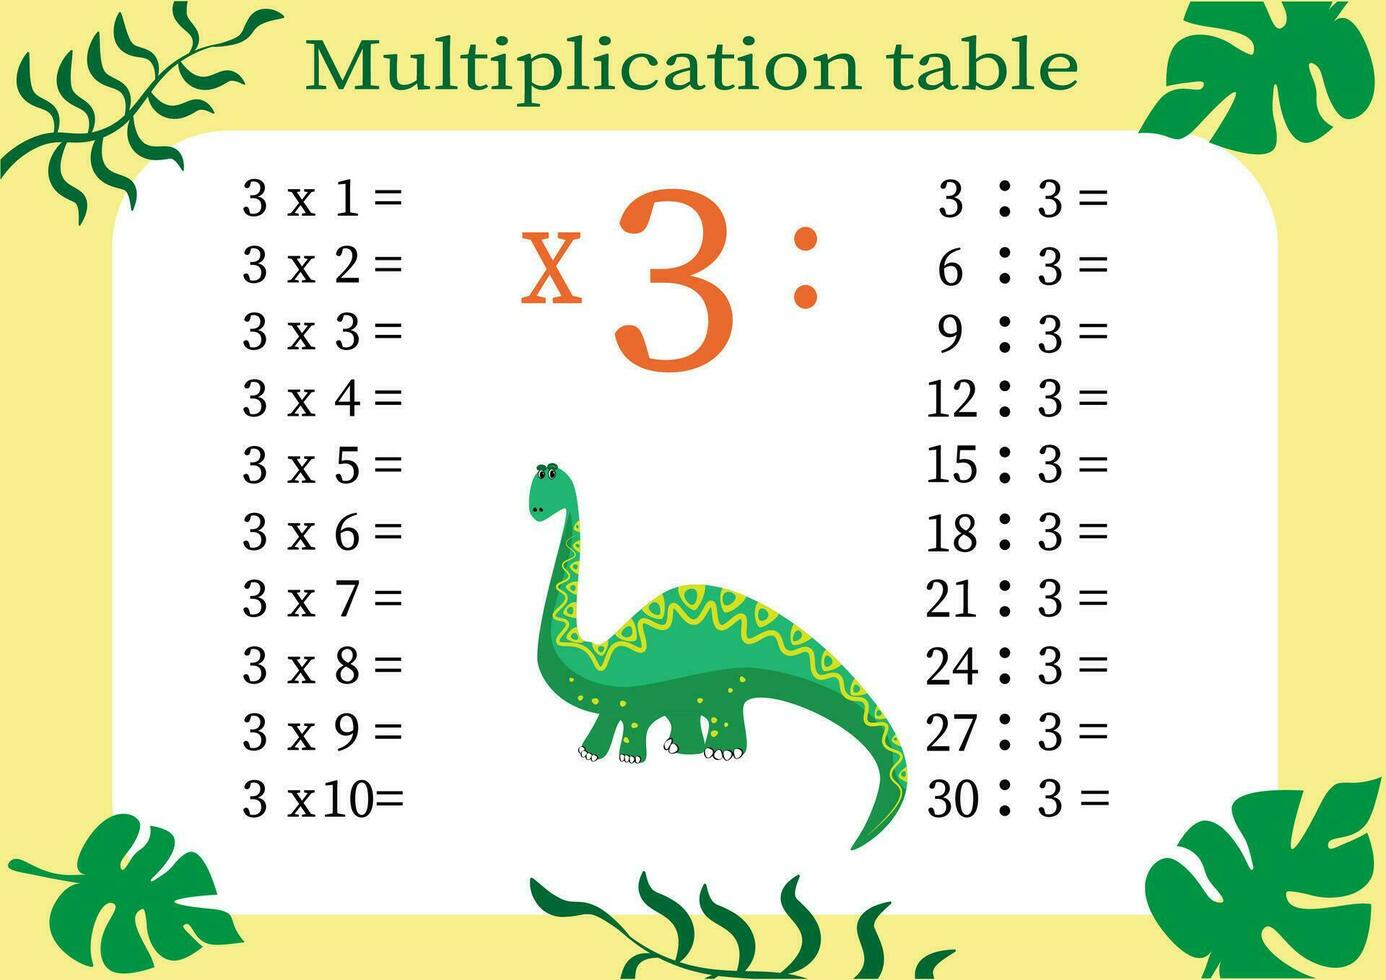 Multiplication table by 3 with a task to consolidate your knowledge of multiplication. Colorful cartoon multiplication table vector for teaching math. Cartoon dinosaurs. EPS10